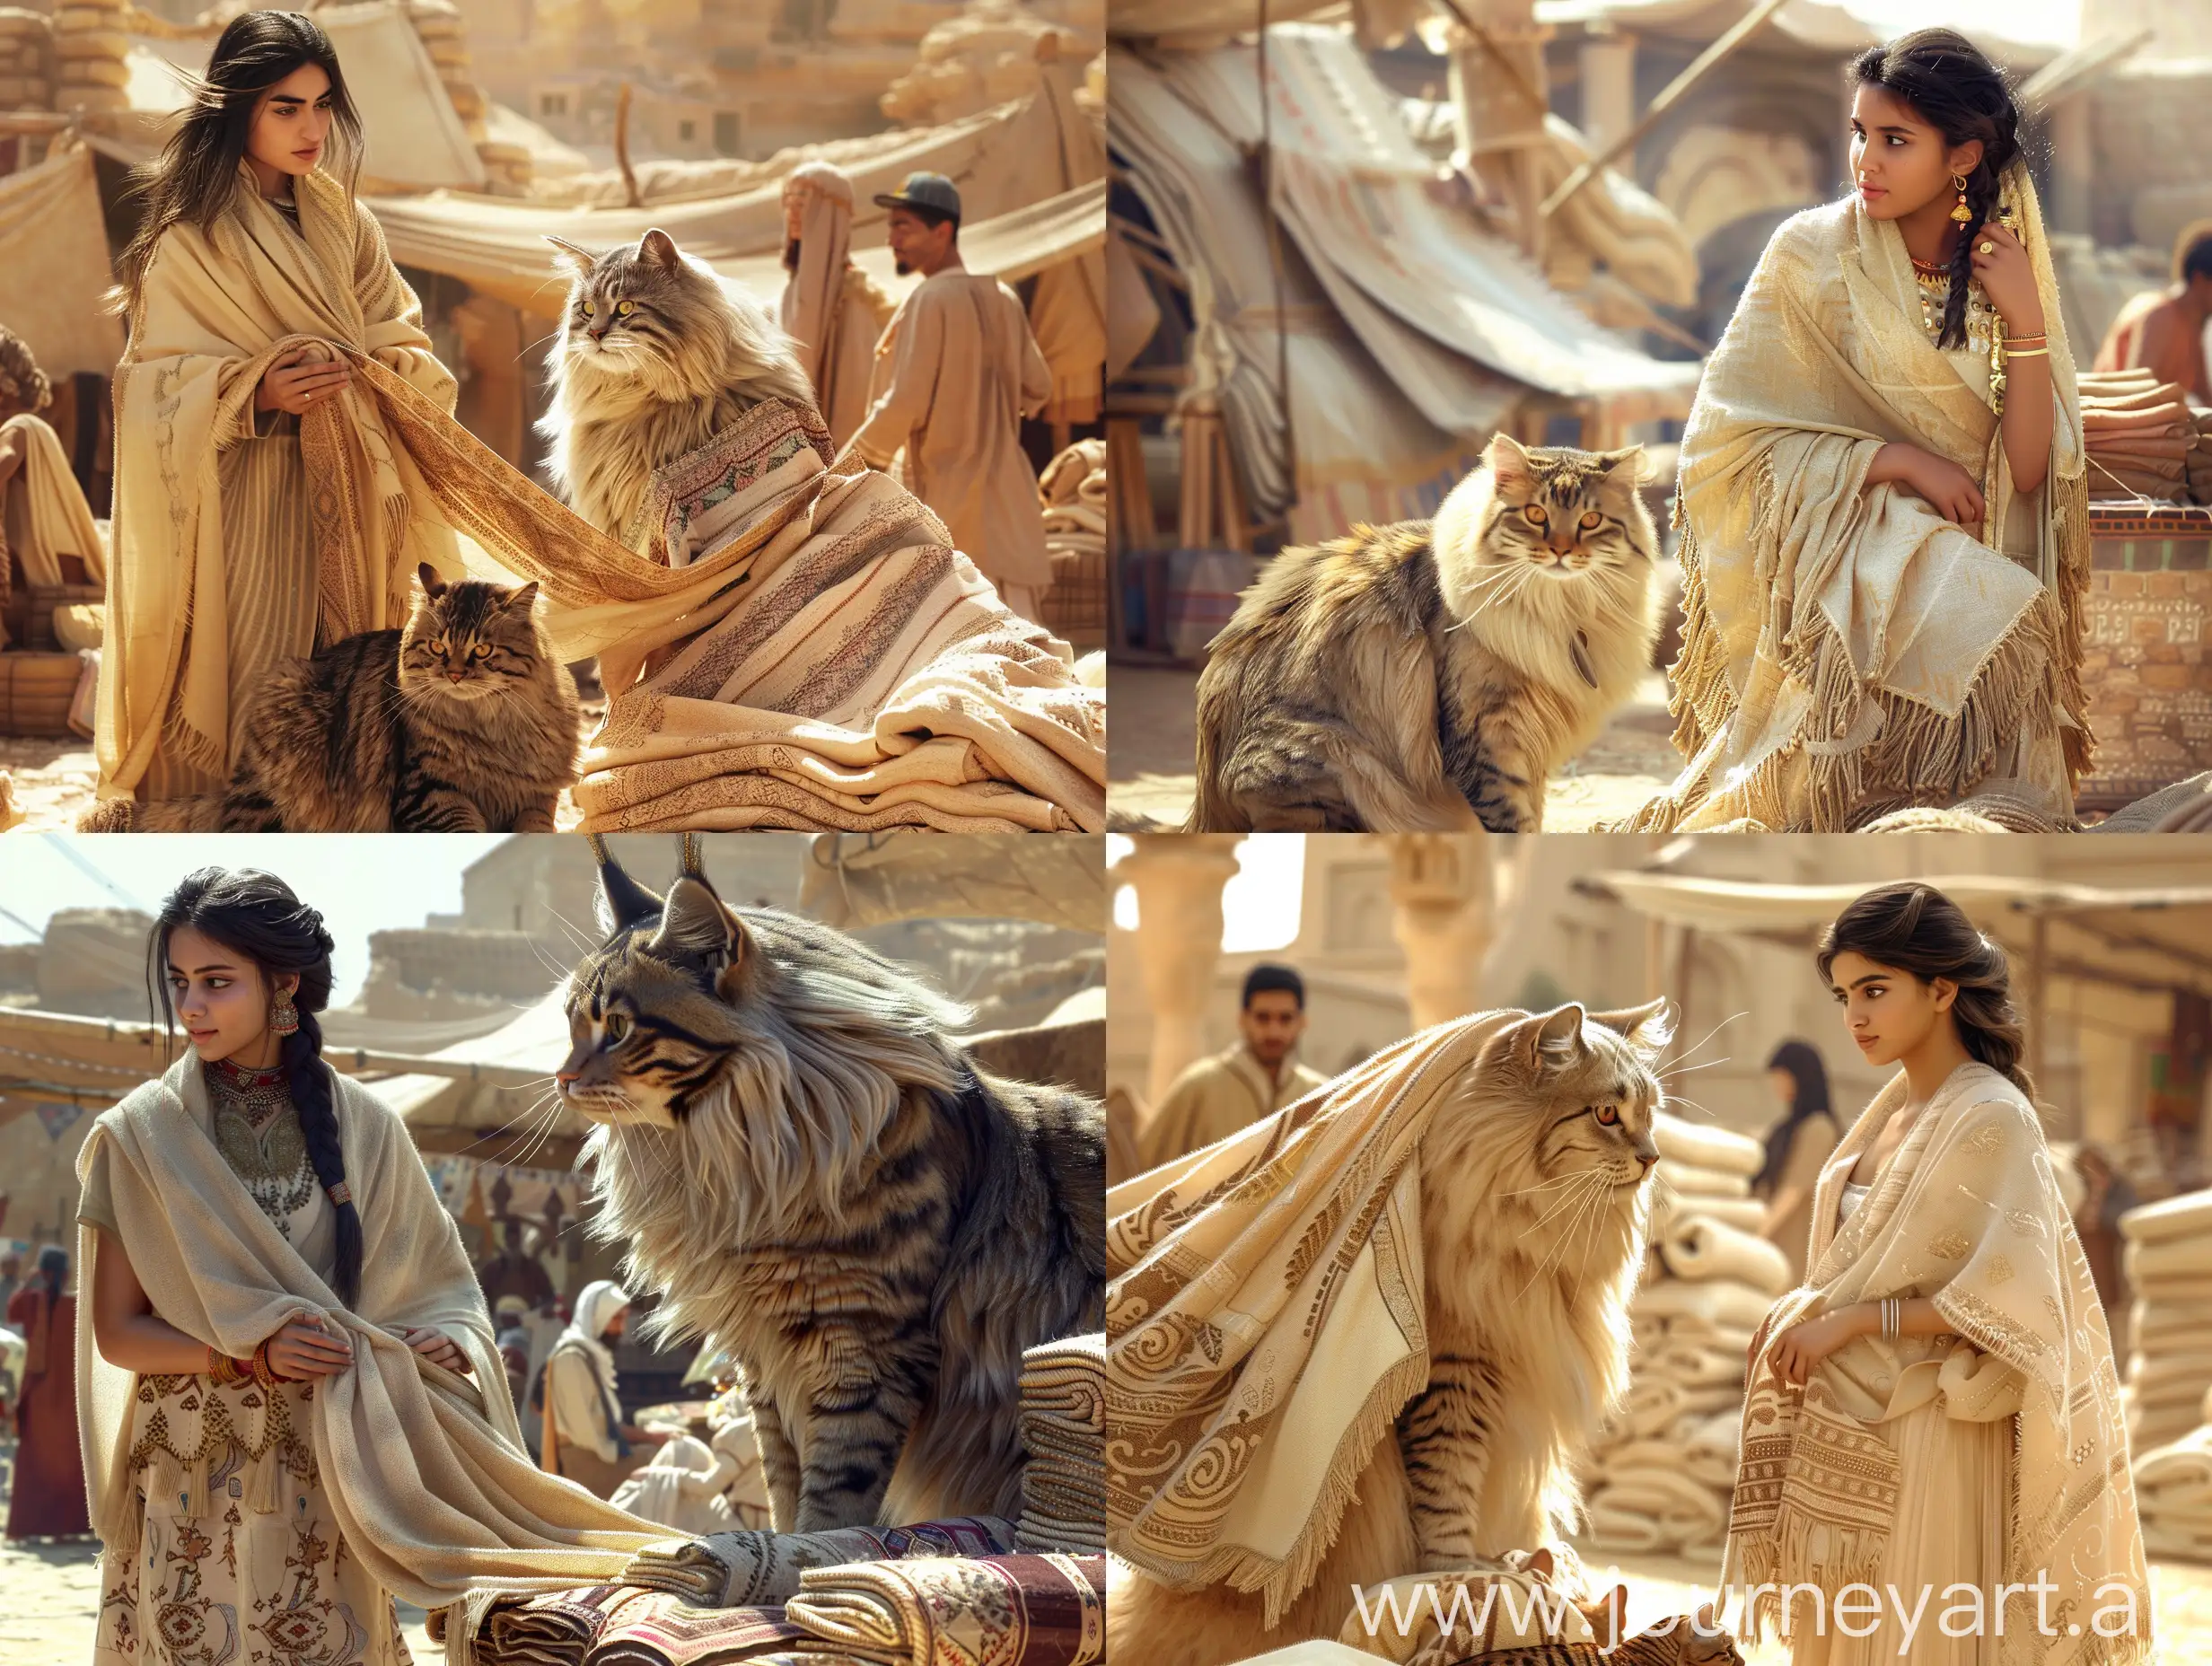 A beautiful young Persian woman in a traditional dress and a cream-colored shawl is selling shawls she has woven in the Arg Bam Bazaar in the Persian Empire, while a giant big Persian cat sits next to her vendor.  The rest of the marketers are also like this. in a desert, in an ancient civilization, cinematic, epic realism,8K, highly detailed, medium shot, upper body, glamour lighting, natural lighting, backlit 